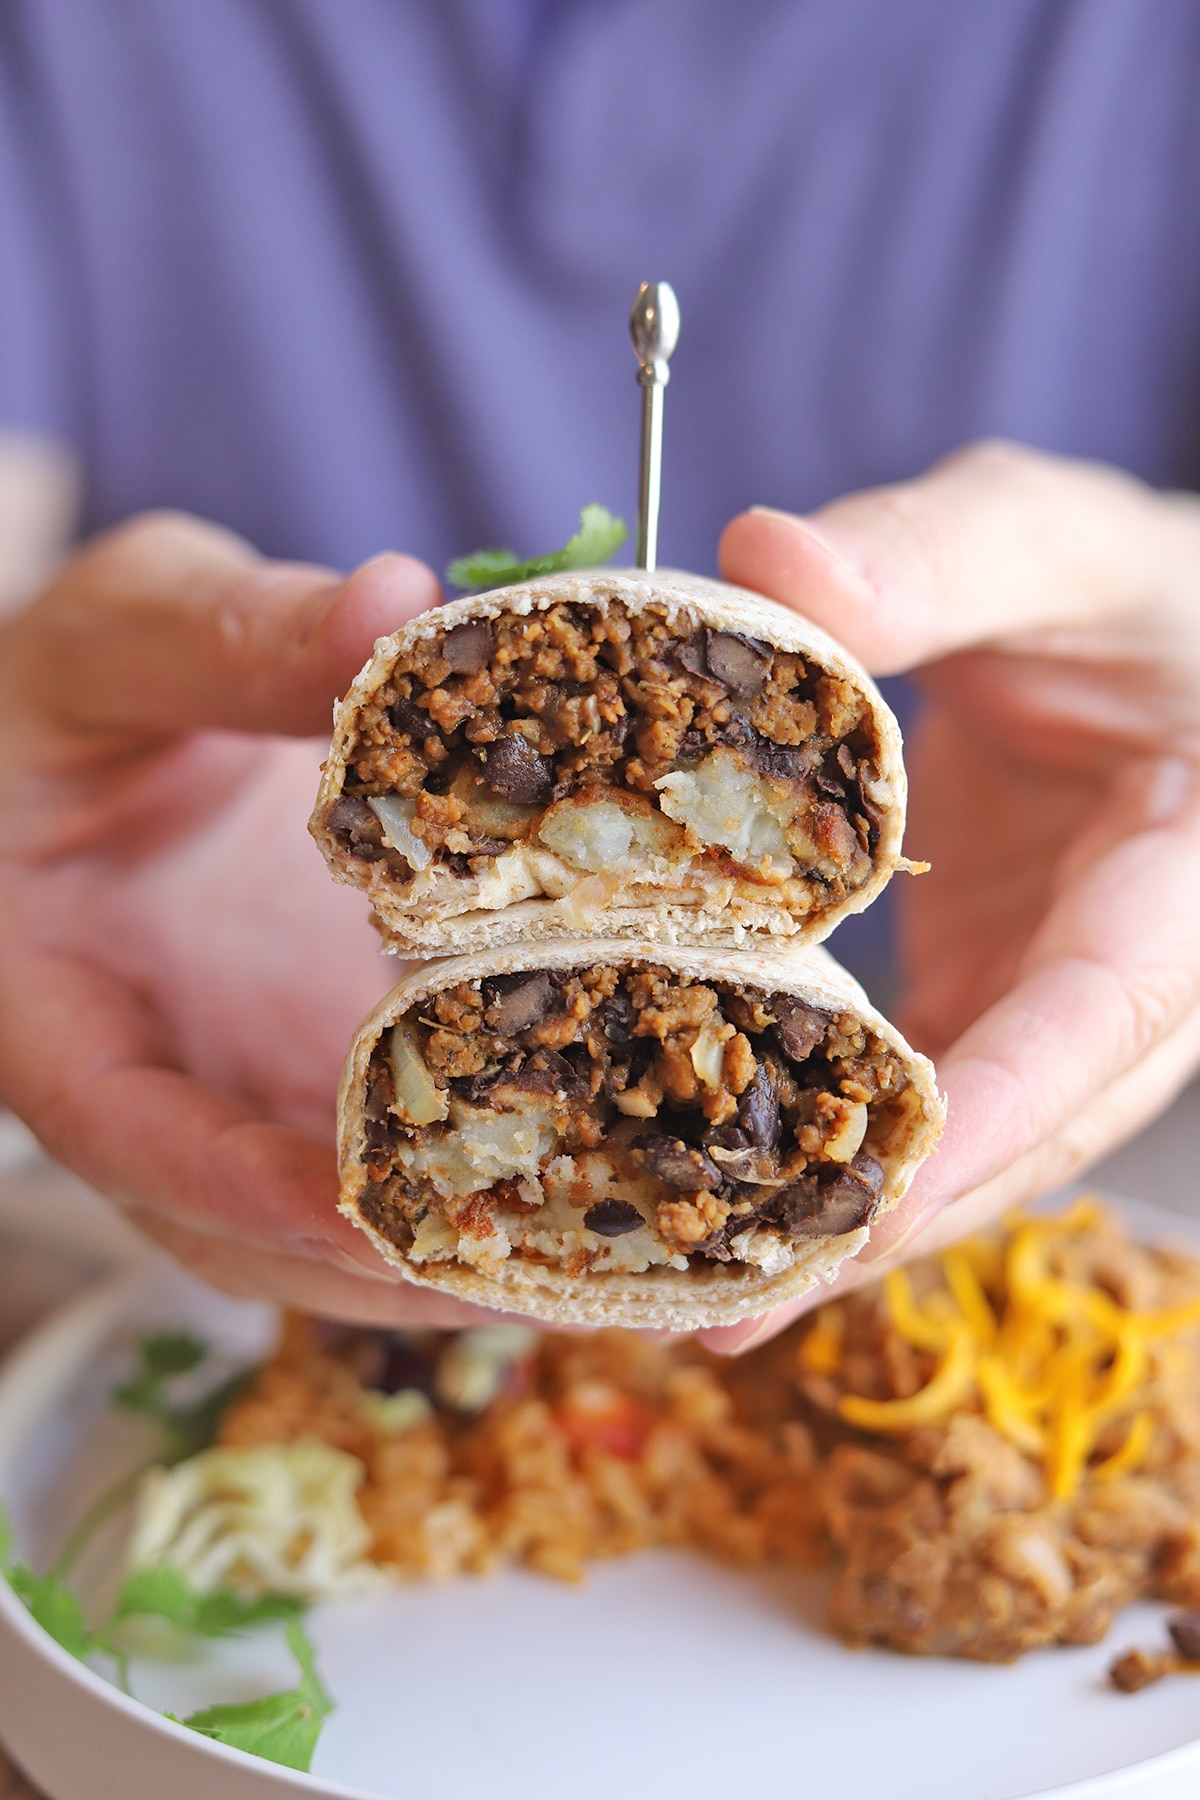 Hands holding burritos cut in half, showing tots & taco meat.